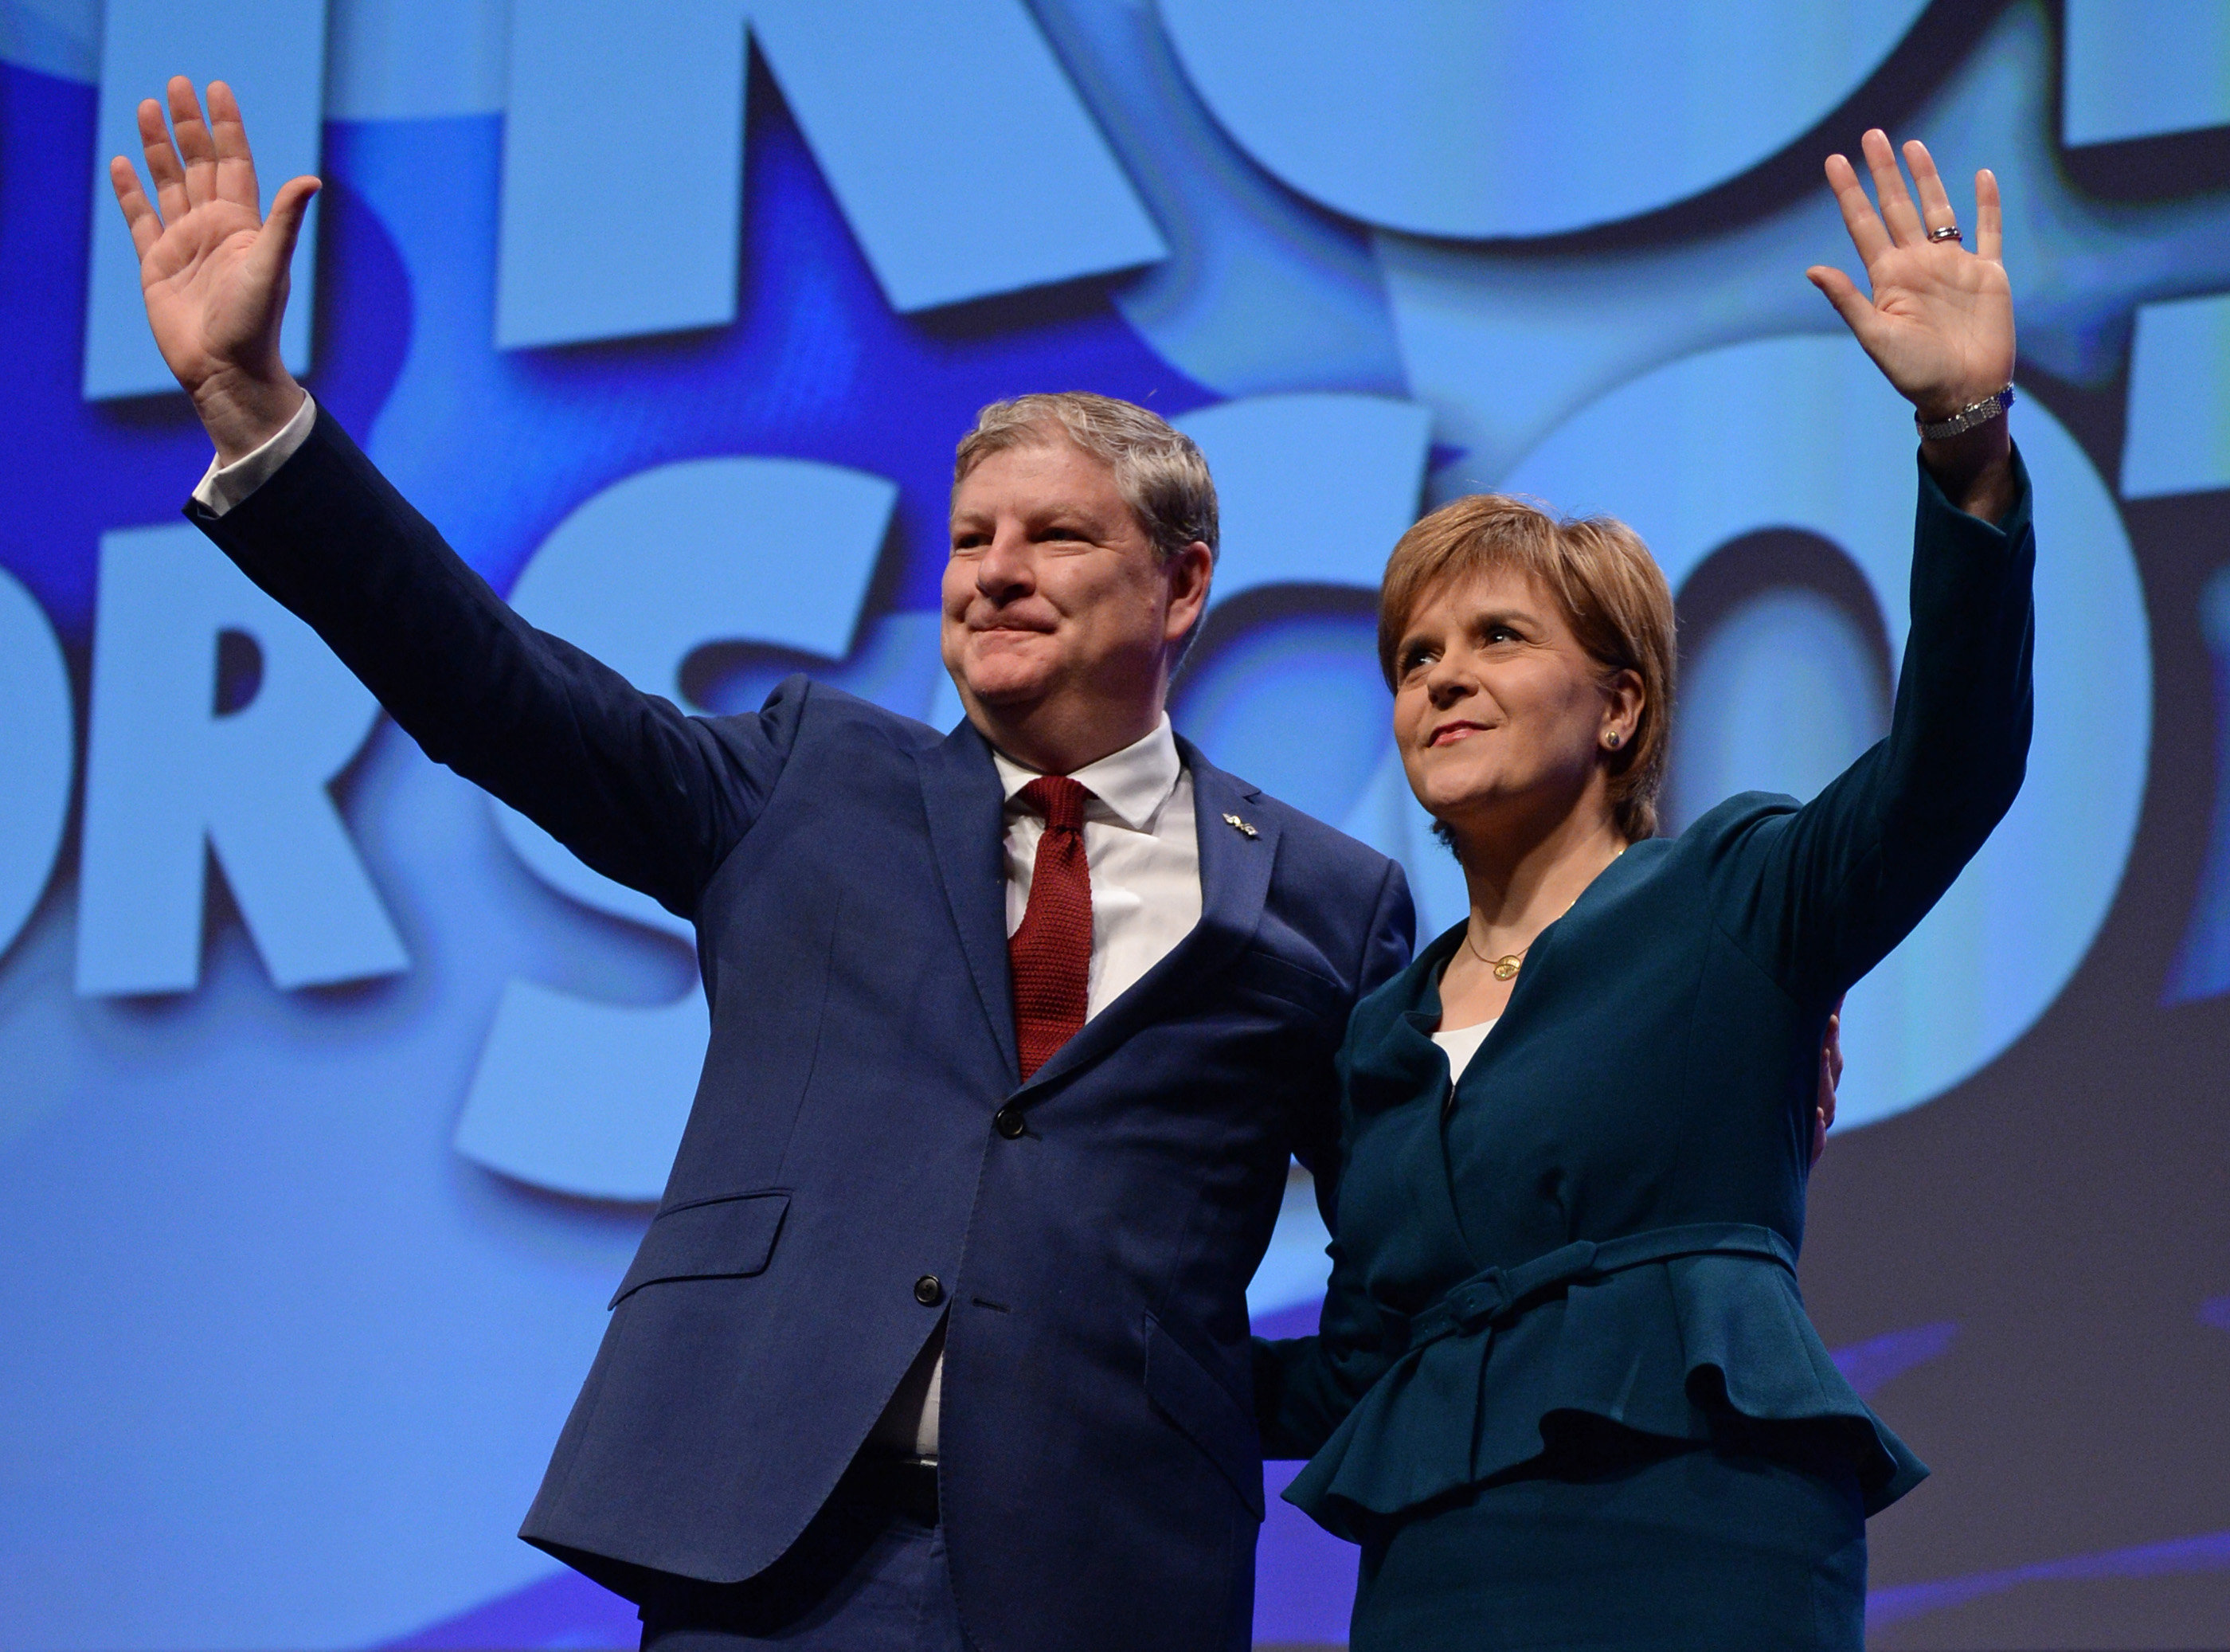 Scottish First Minister Nicola Sturgeon and new SNP deputy leader Angus Roberston, addressing the SNP Autumn Conference in Glasgow SECC, where she warned against the dangers of hard Brexit.